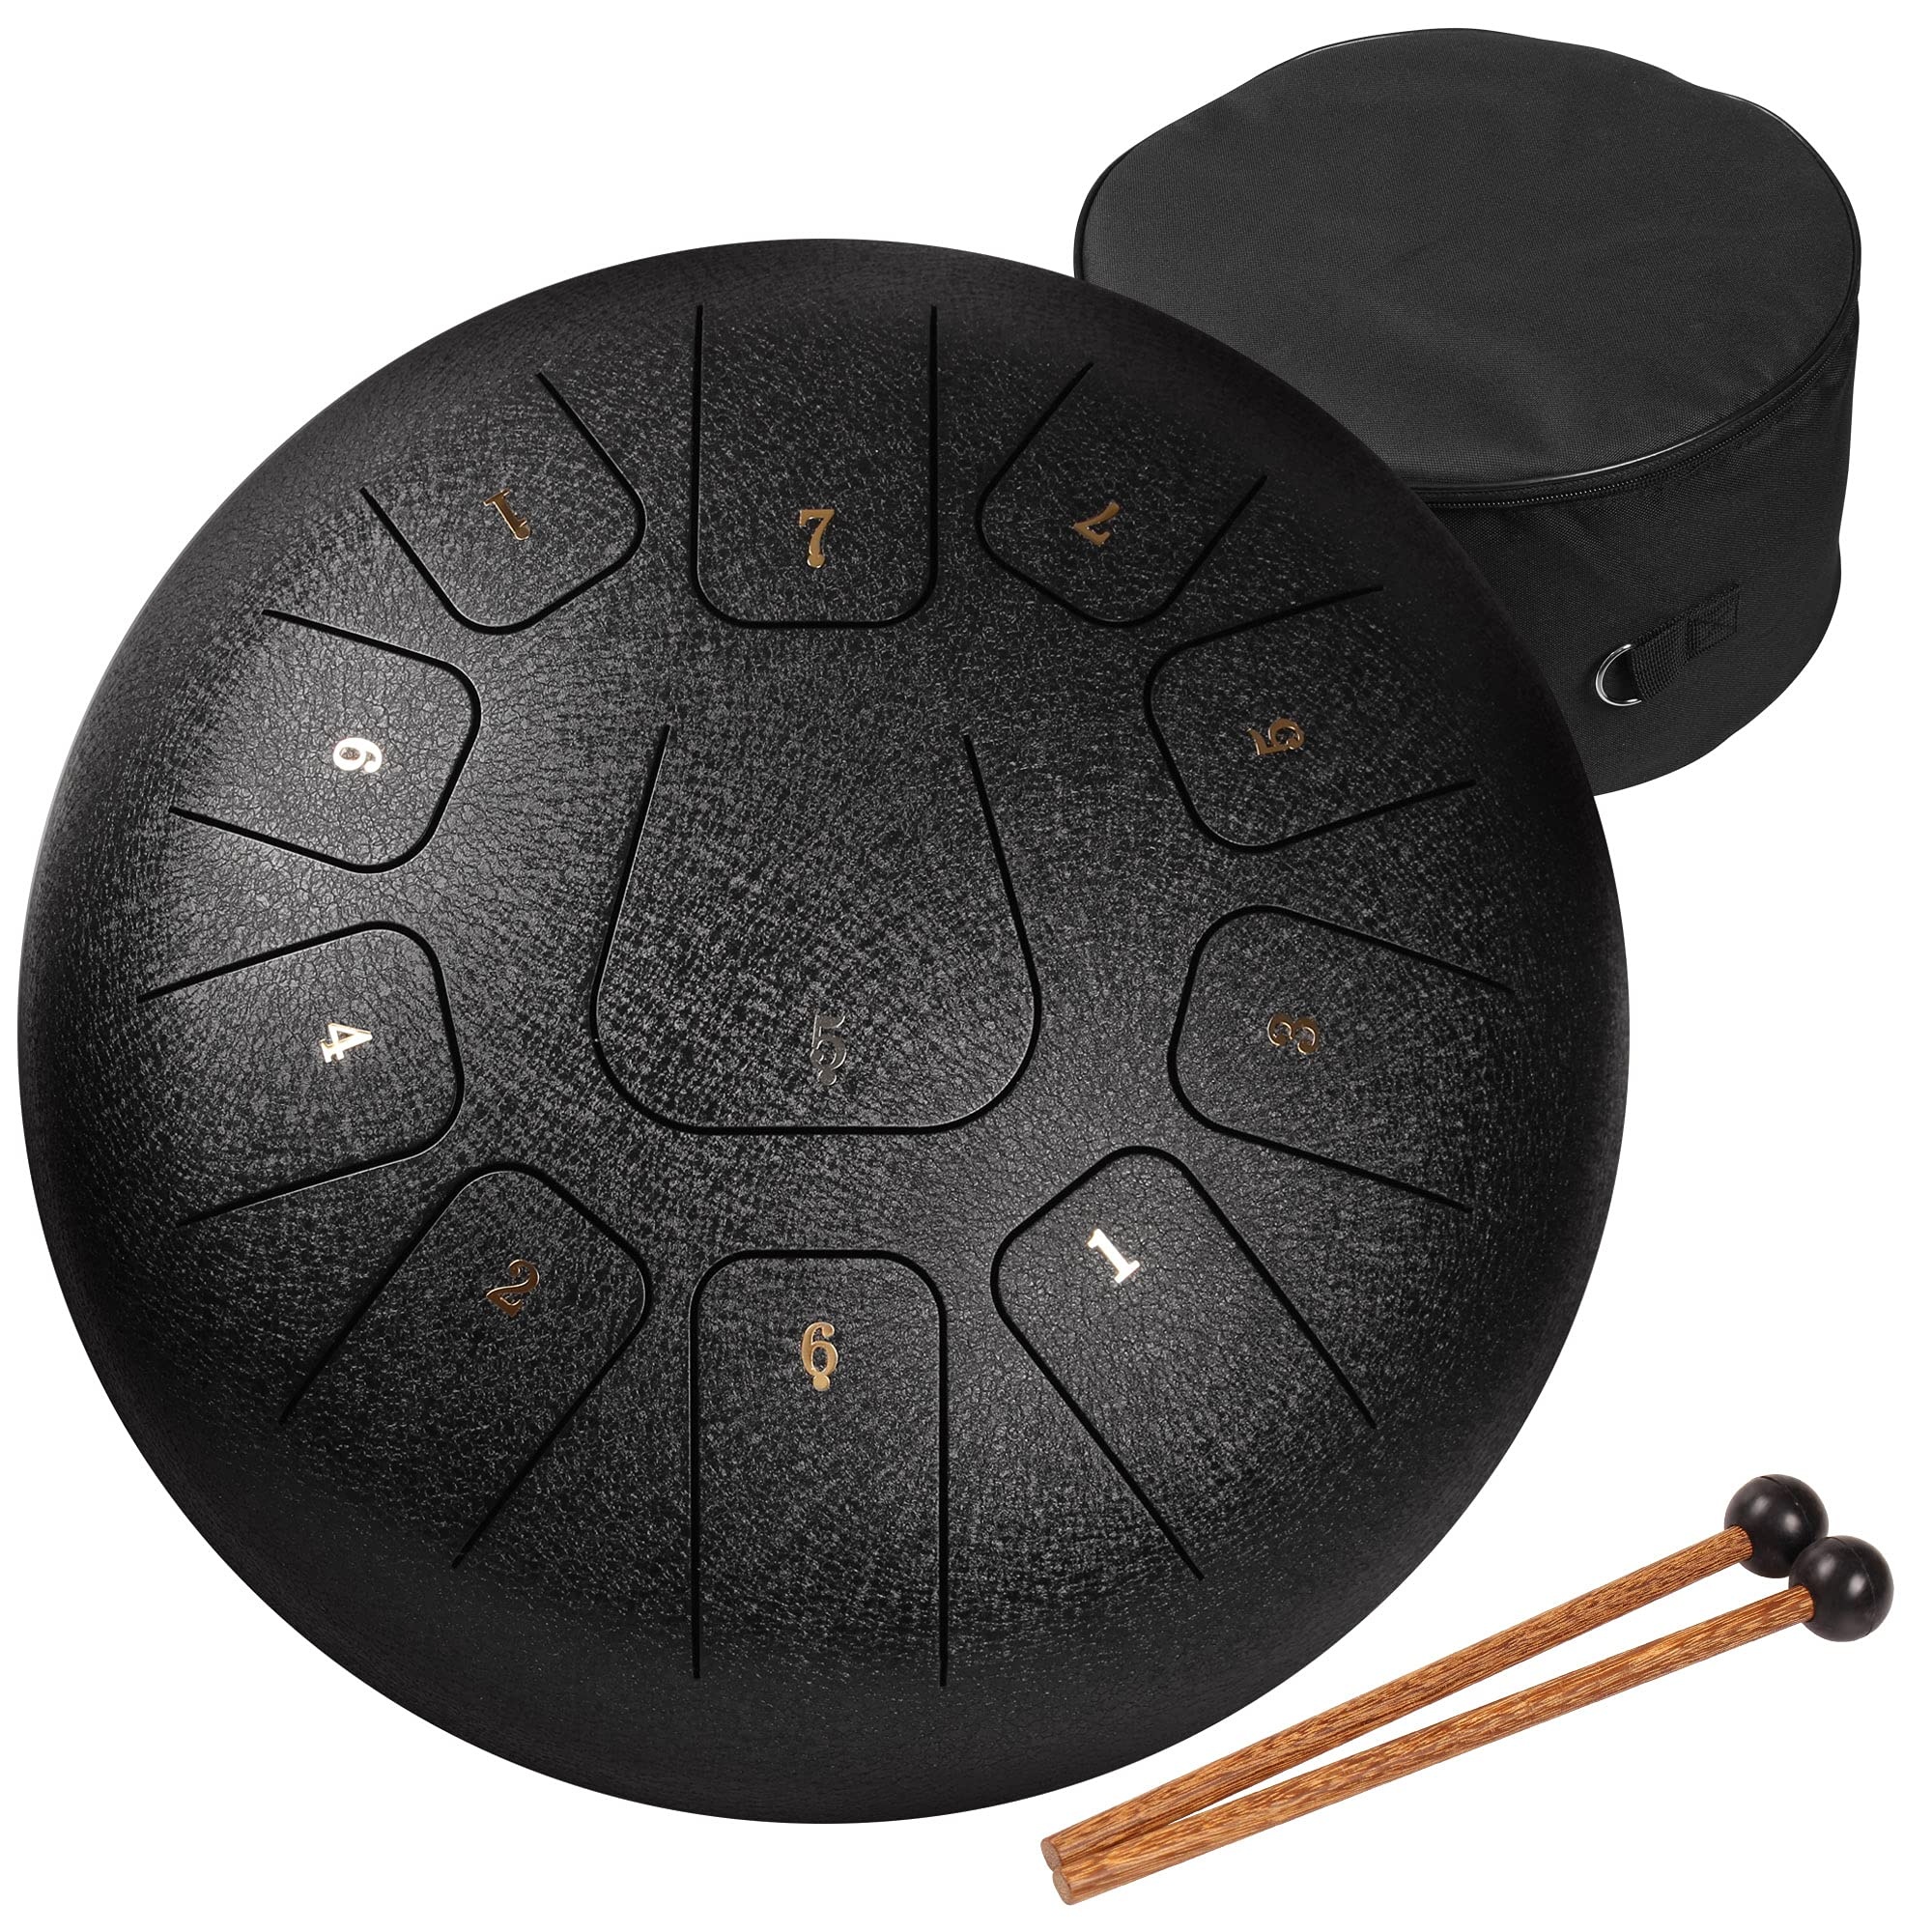 Hang (Instrument): Amkoskr 12 inches 30 cm steel tongue drum, 11 notes, Percussion instrument, Pure and ethereal sound. 2000x2000 HD Wallpaper.